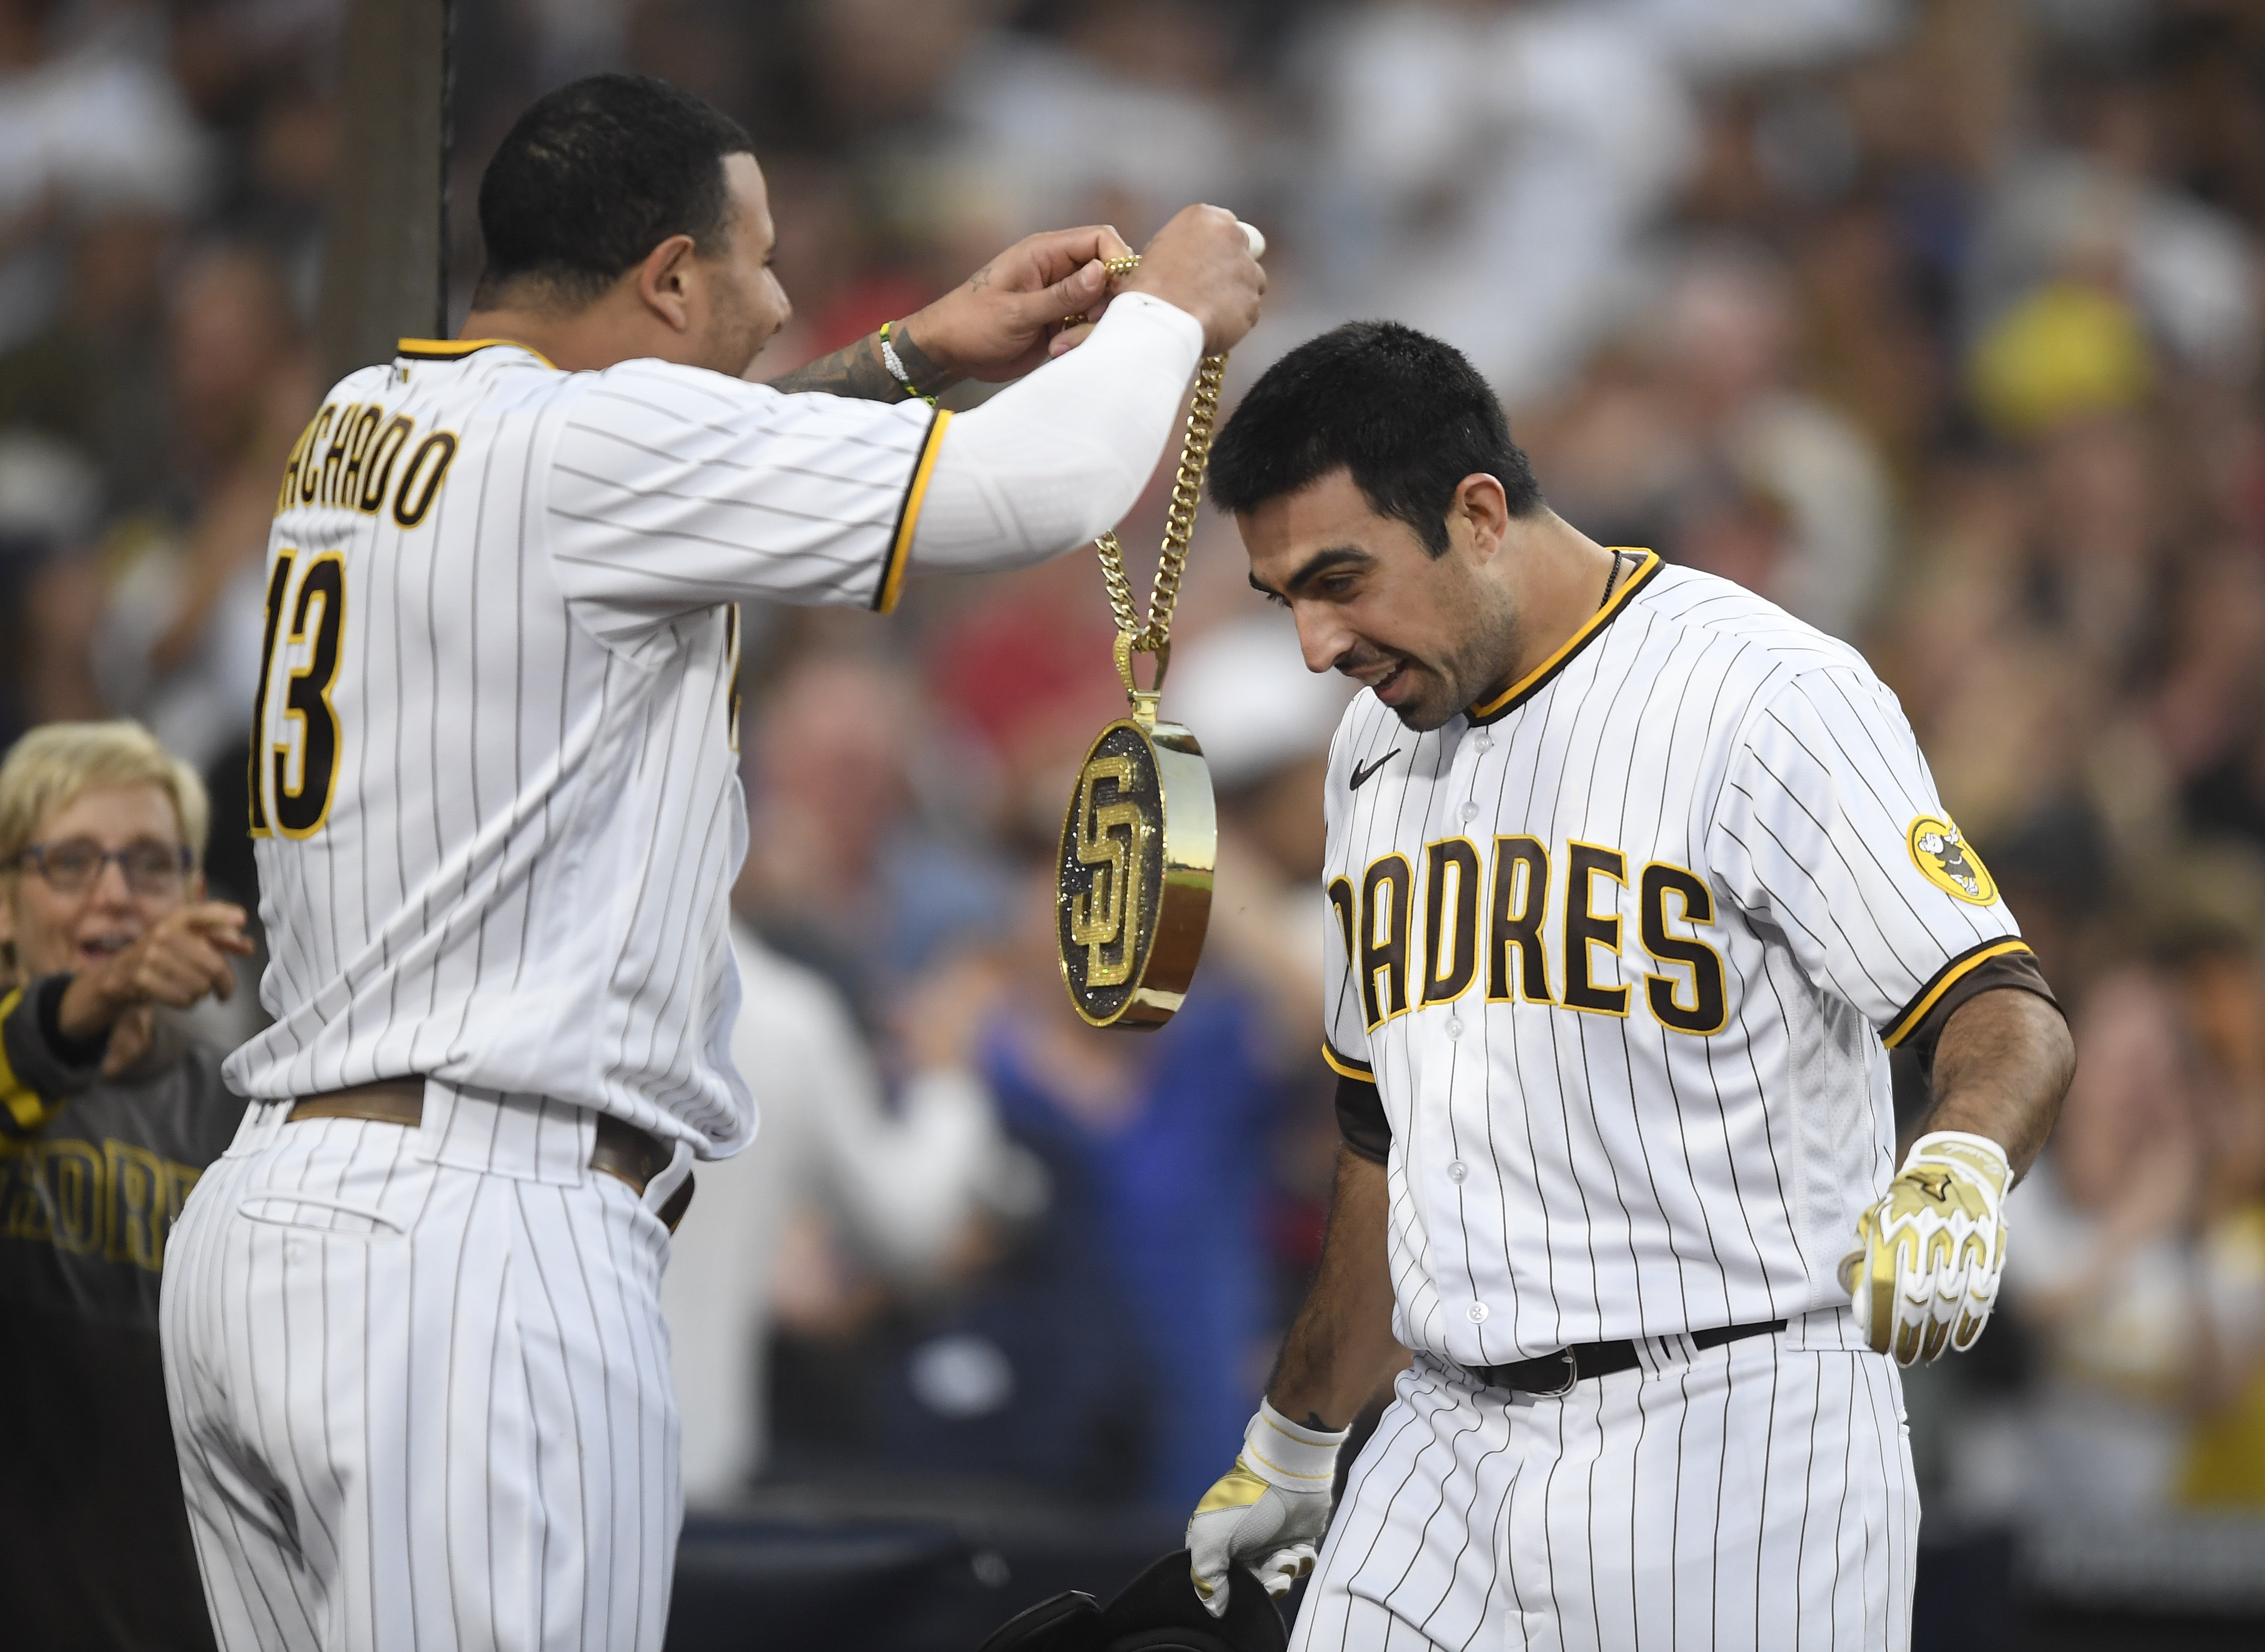 In 2nd Career Game, Rookie Pitcher Hits Grand Slam, Helps Padres Overcome 8-0 Deficit